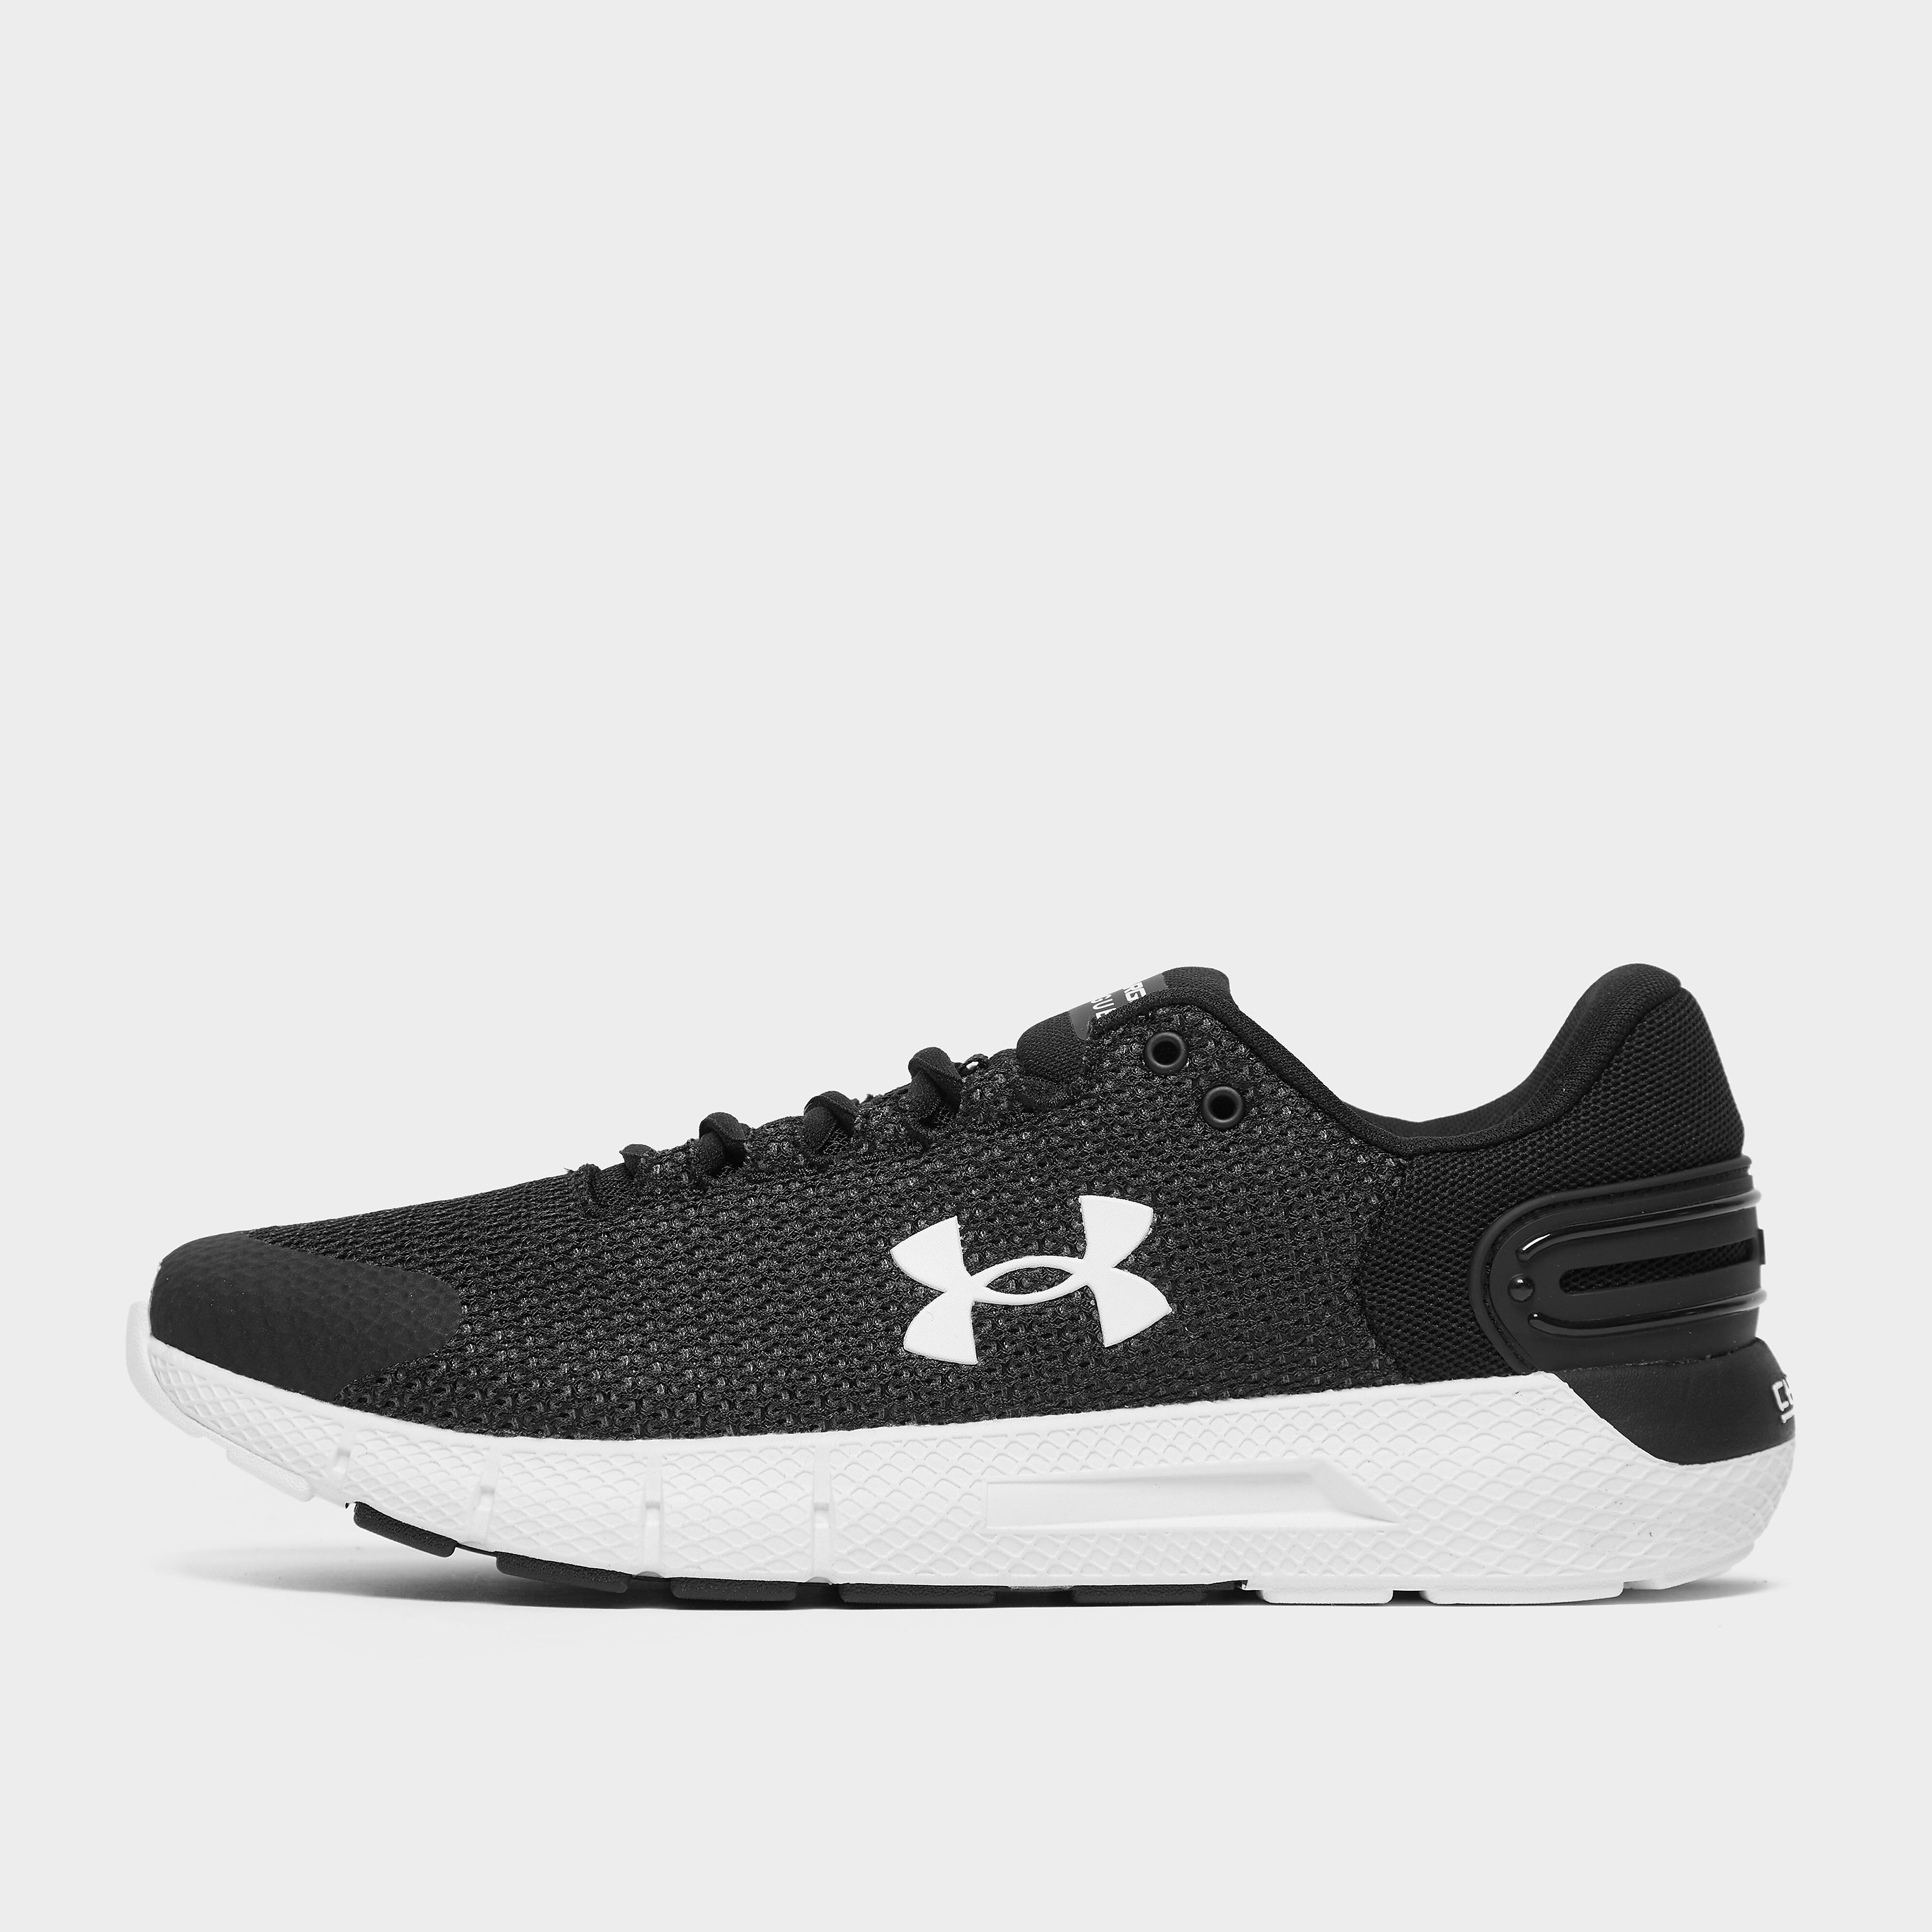 Under Armour Charged Rogue 2.5 - Black - Mens  size: 11.5